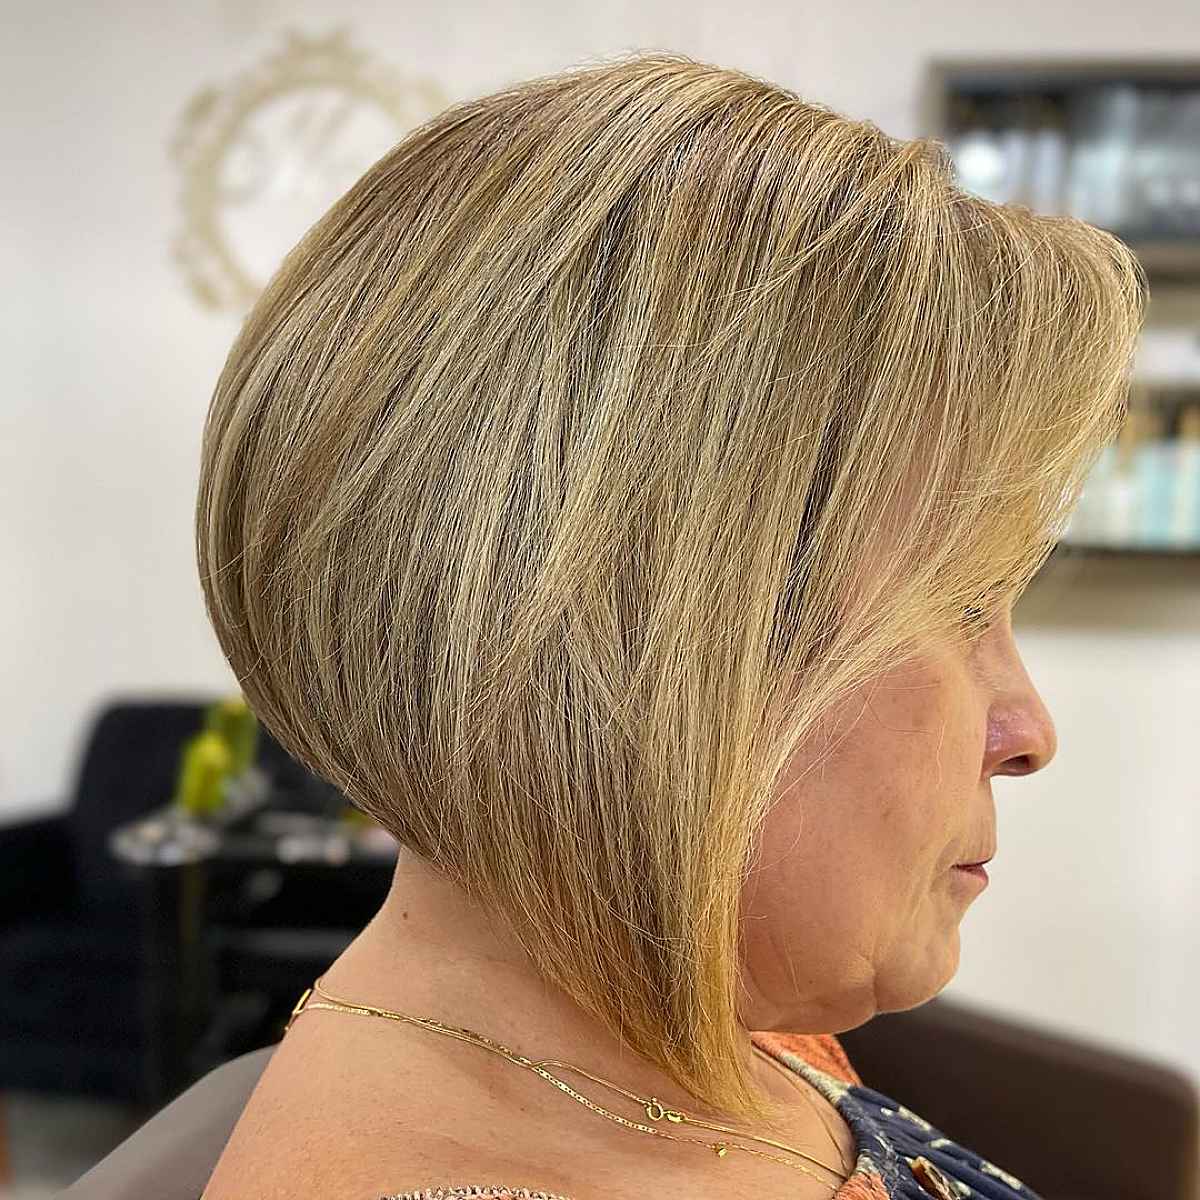 Haircut for fat ladies over 50 with Thick Hair